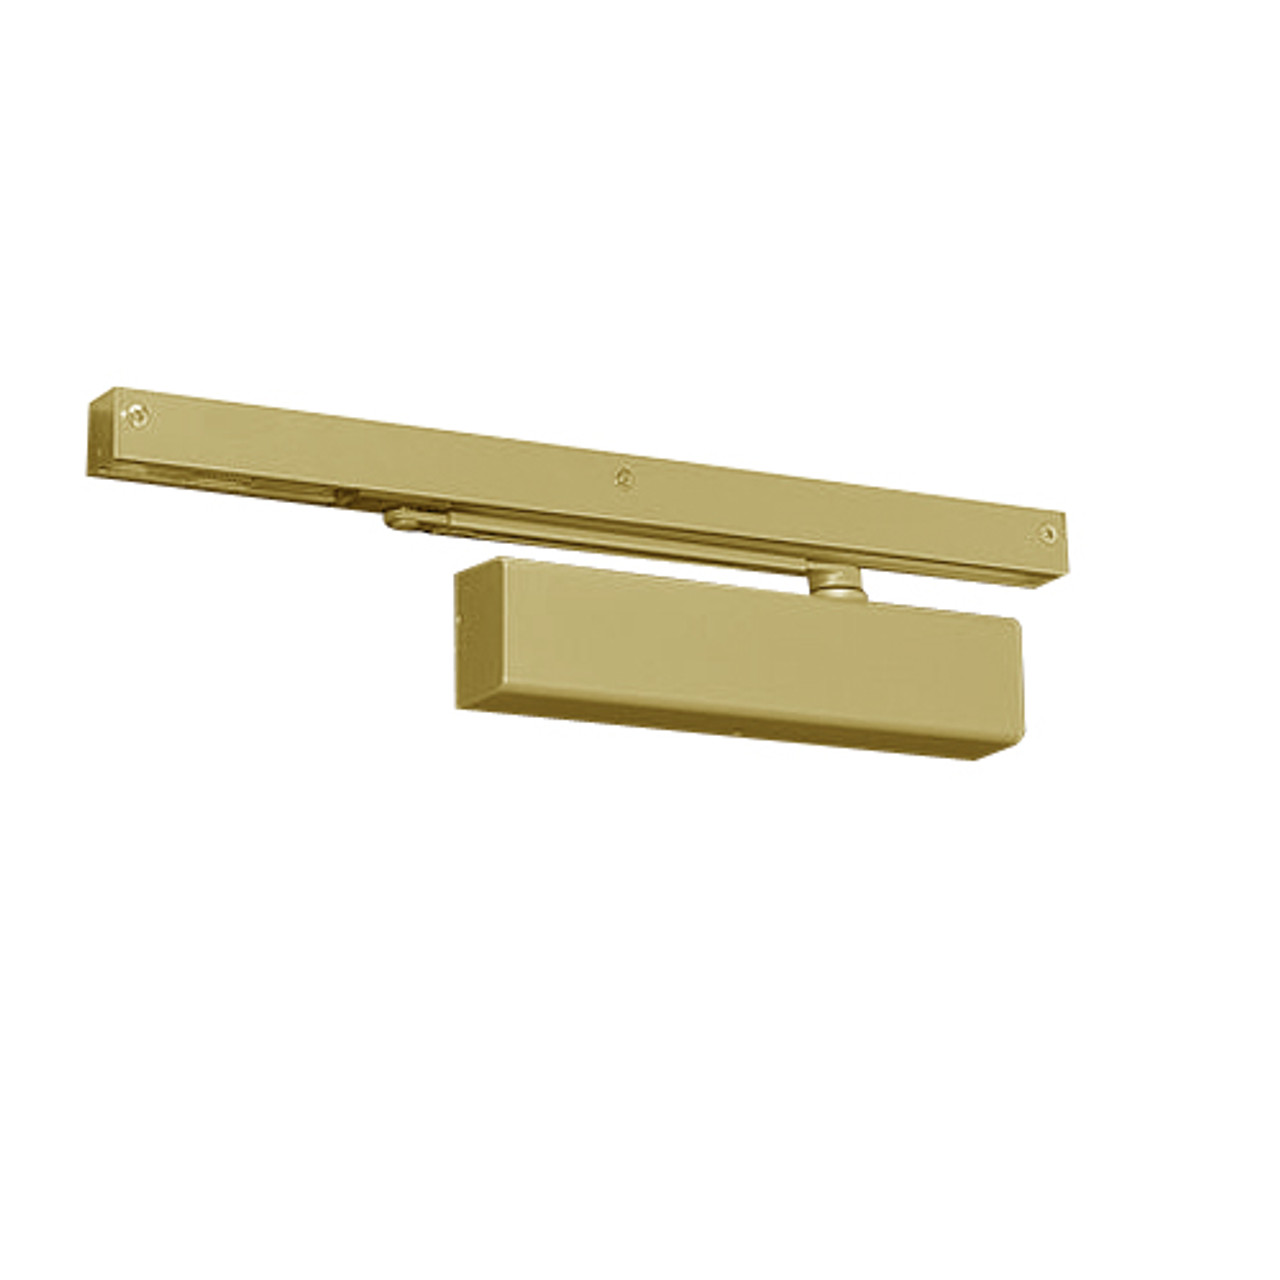 7500STH-DA-696 Norton 7500 Series Hold Open Institutional Door Closer with Pull Side Slide Track in Gold Finish